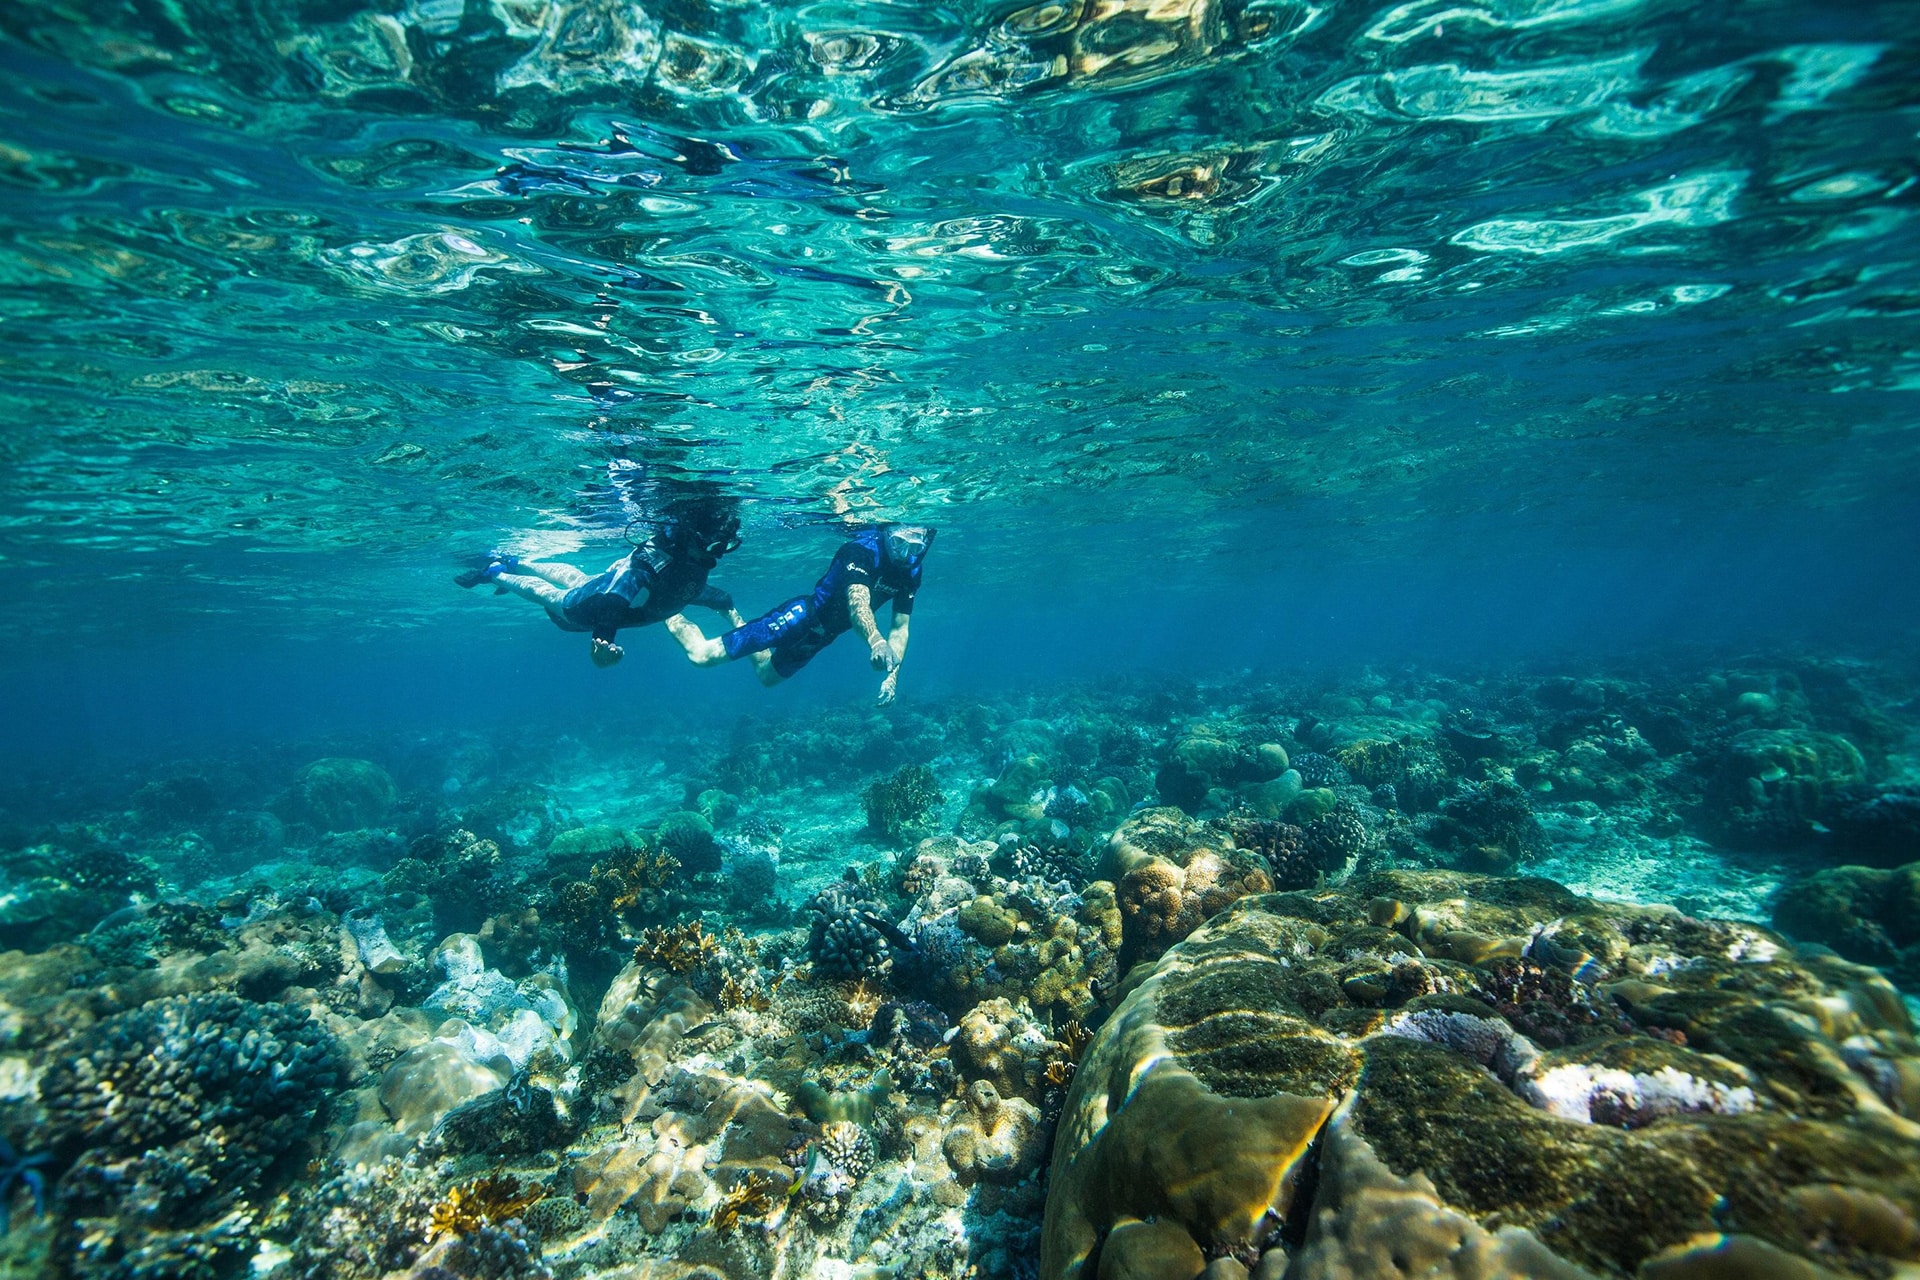 Snorkeling in a protected marine reserve off one of the private islands in Africa